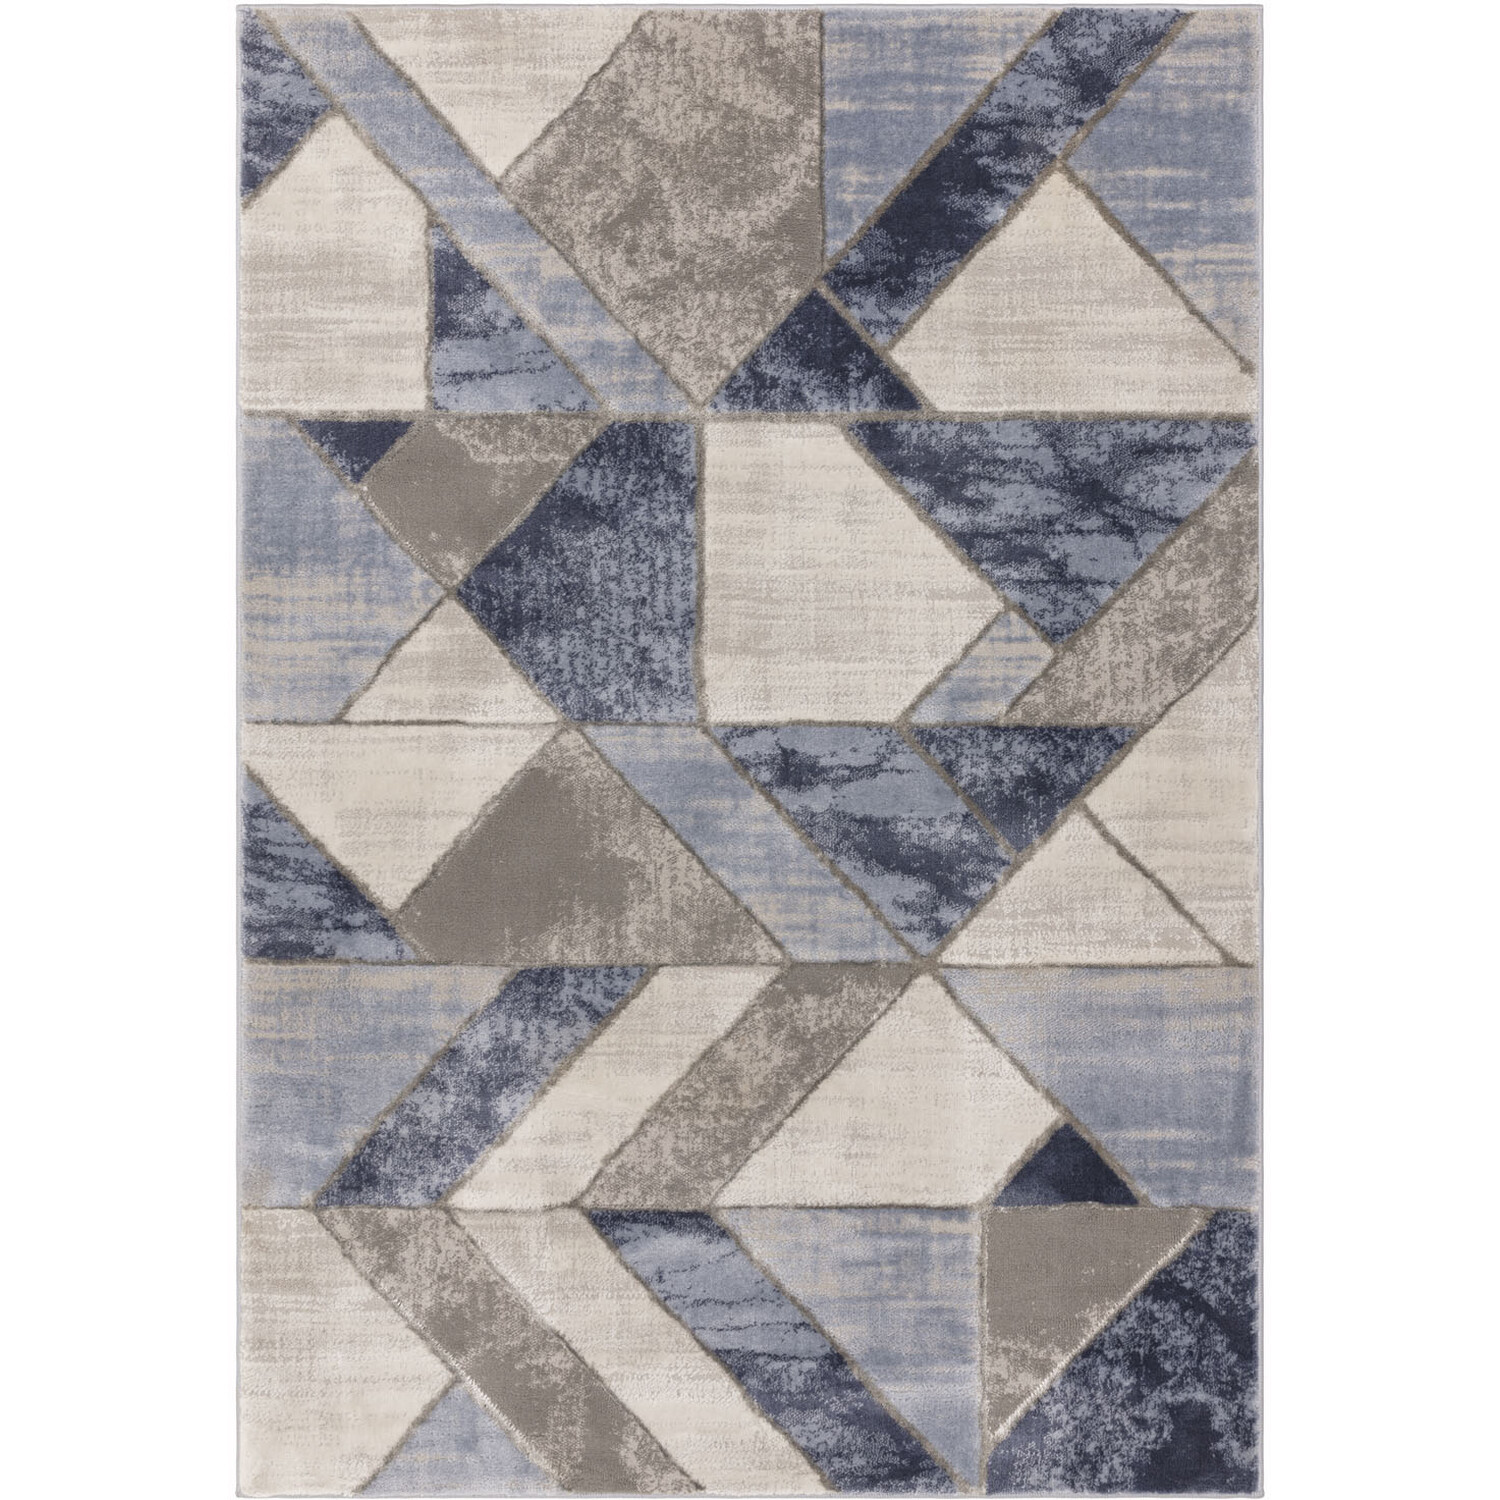 Seattle Blue and Grey Geo Rug 170 x 120cm Image 1